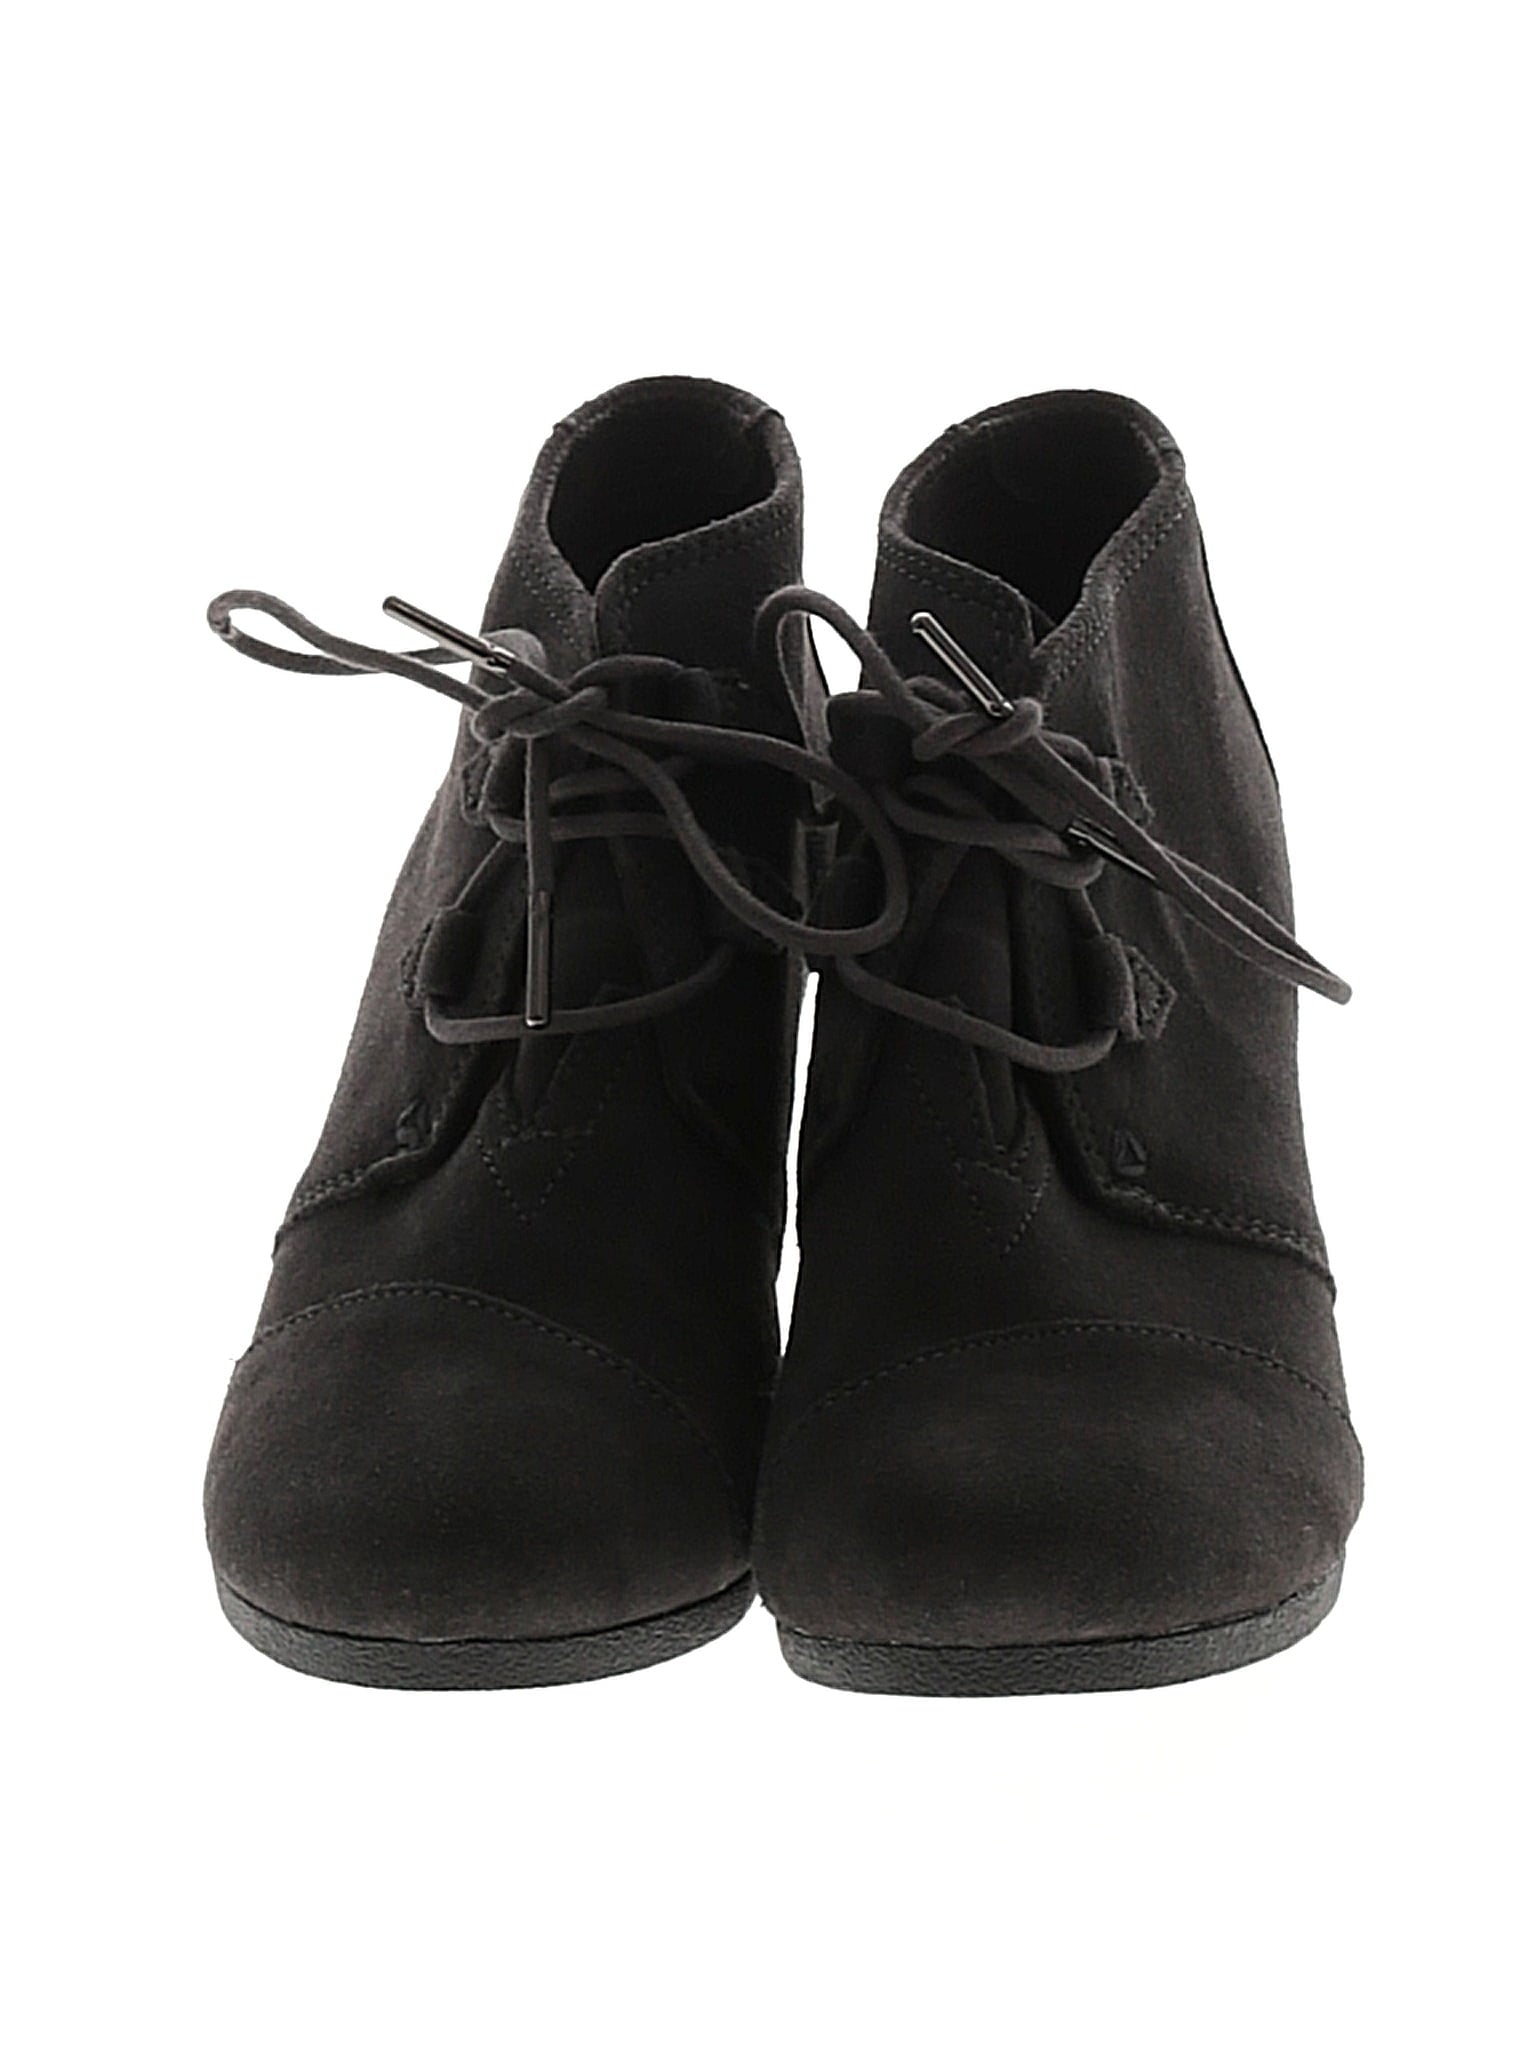 Ankle Boots shoe size - 9